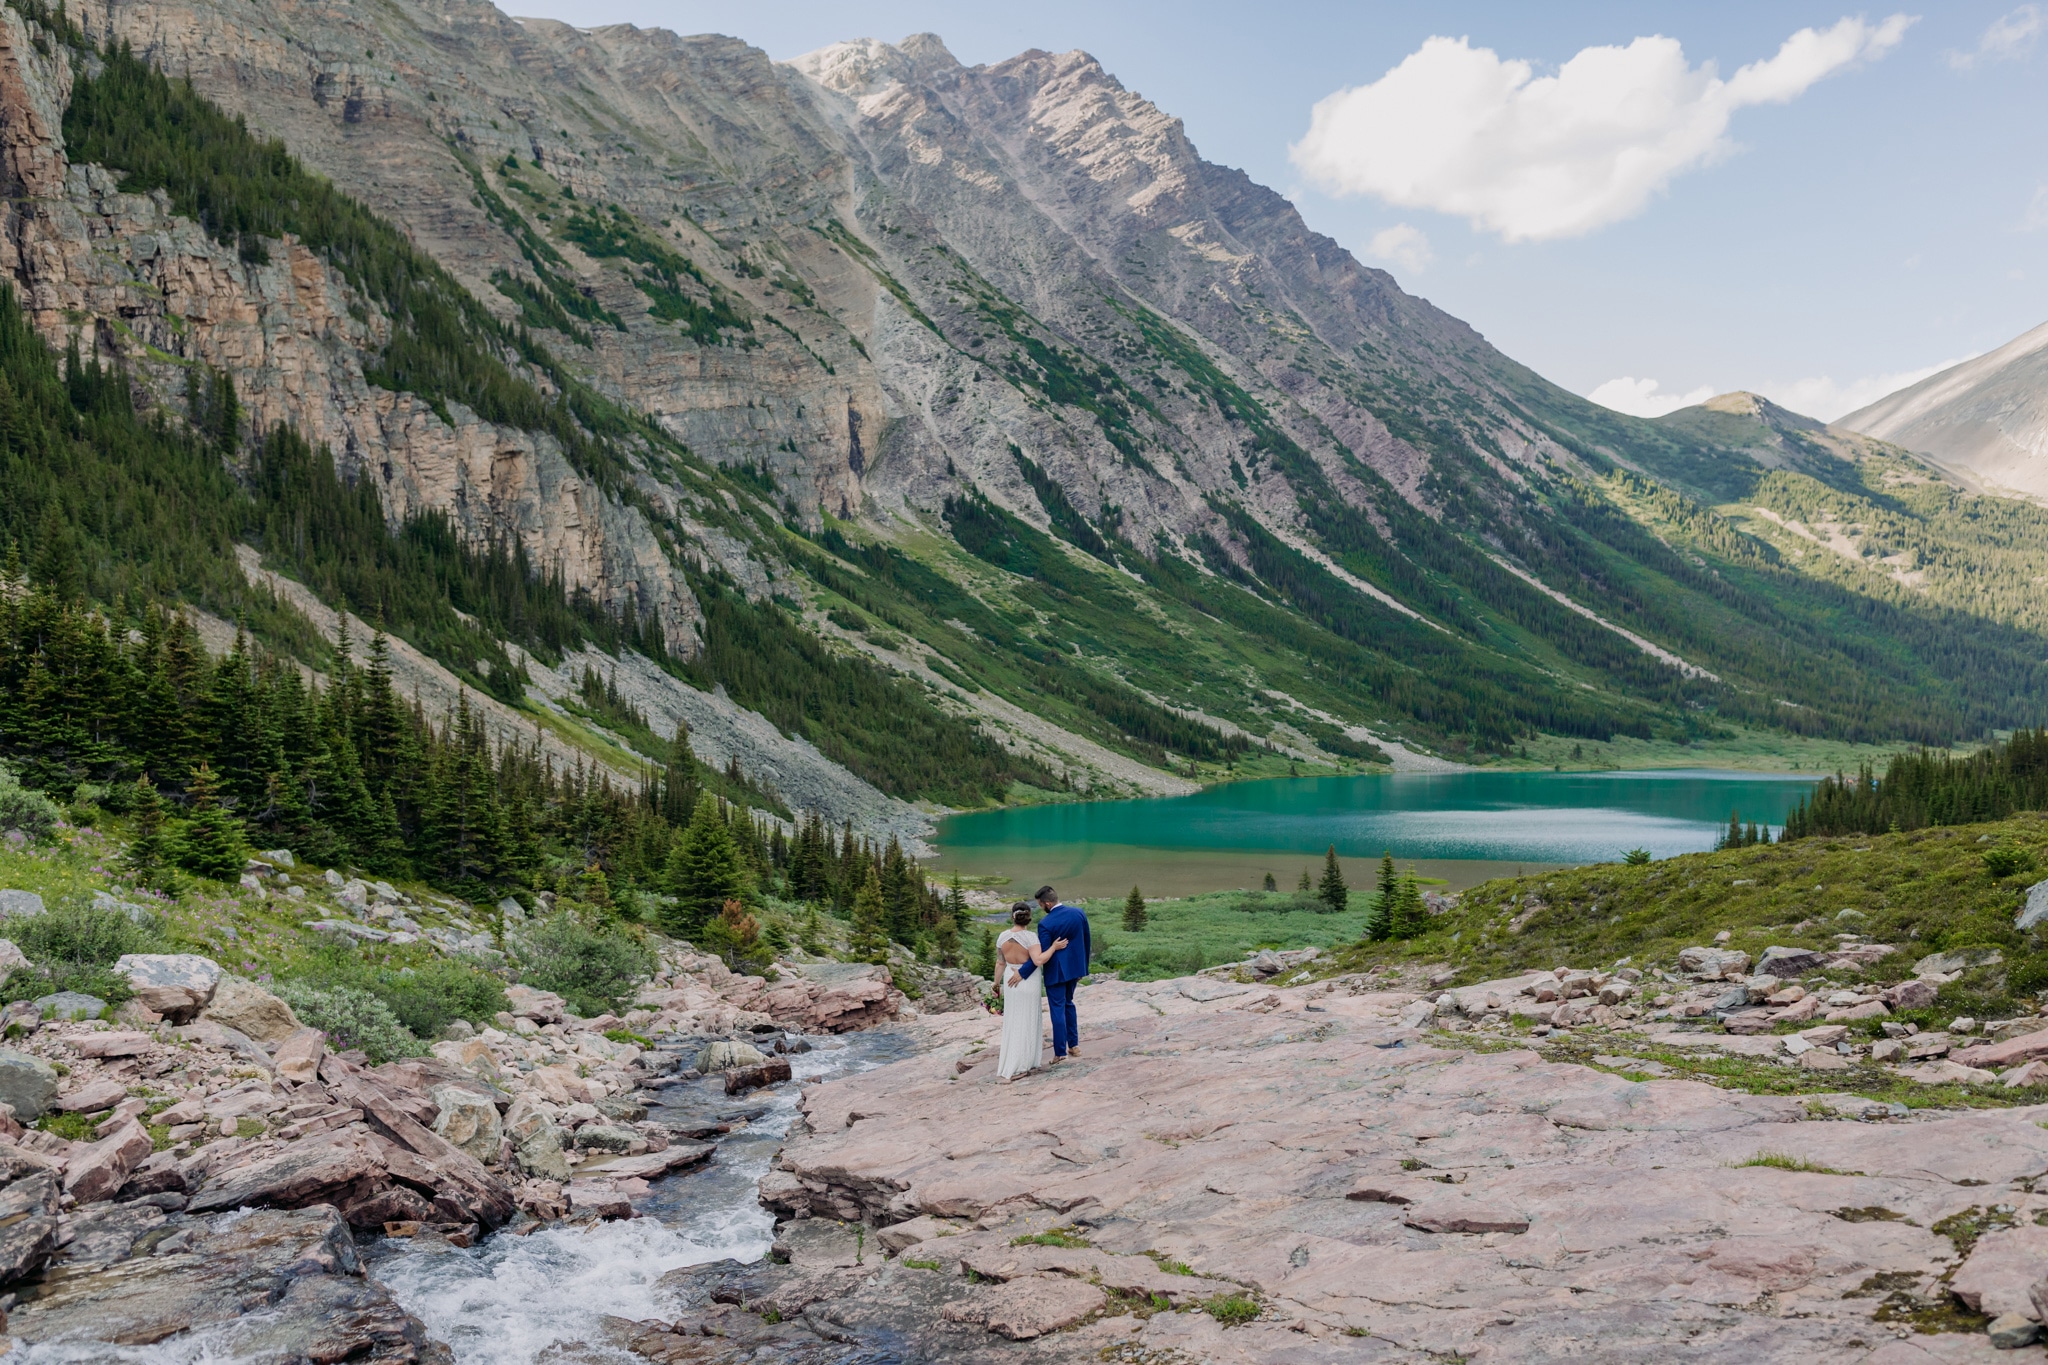 A Guide to Eloping in the Canadian Rockies | Mountain Wedding photographed by ENV Photography | Adventurous helicopter wedding near Cline River & Abraham Lake with Rockies Heli. Lake of the Woods with pink rocks.